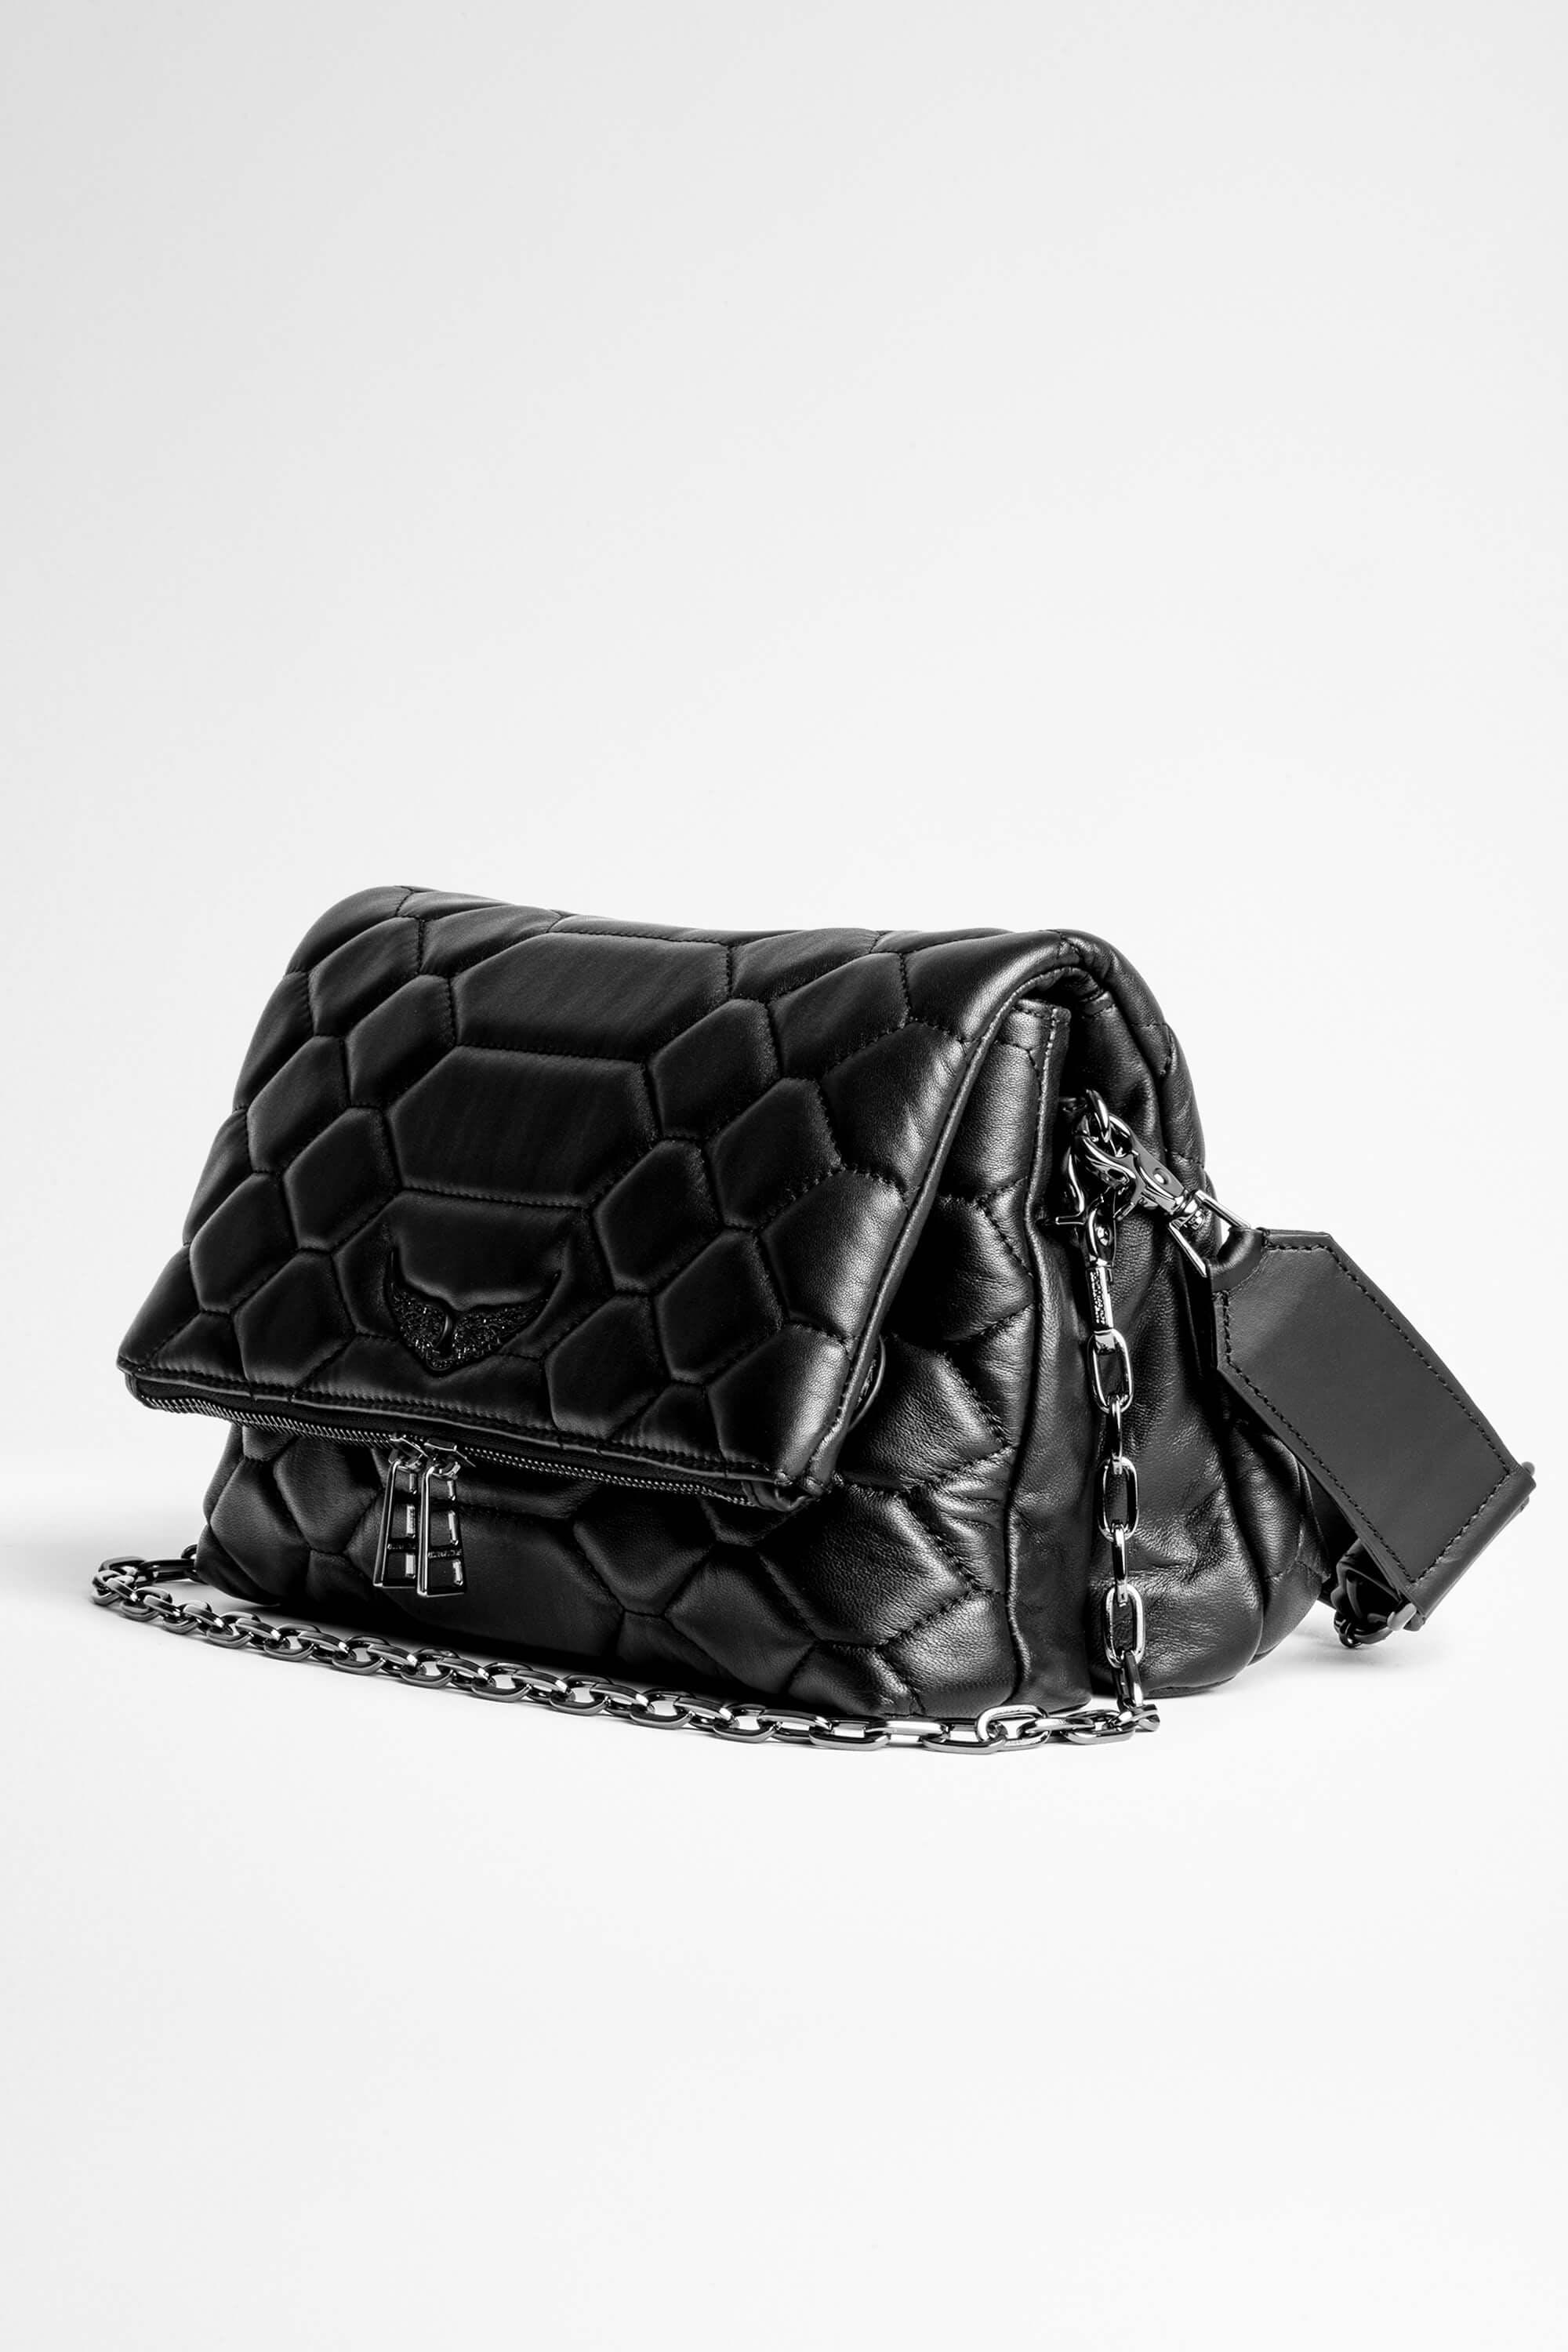 Zadig & Voltaire Leather Rocky Xl Scale Bag in Black - Lyst